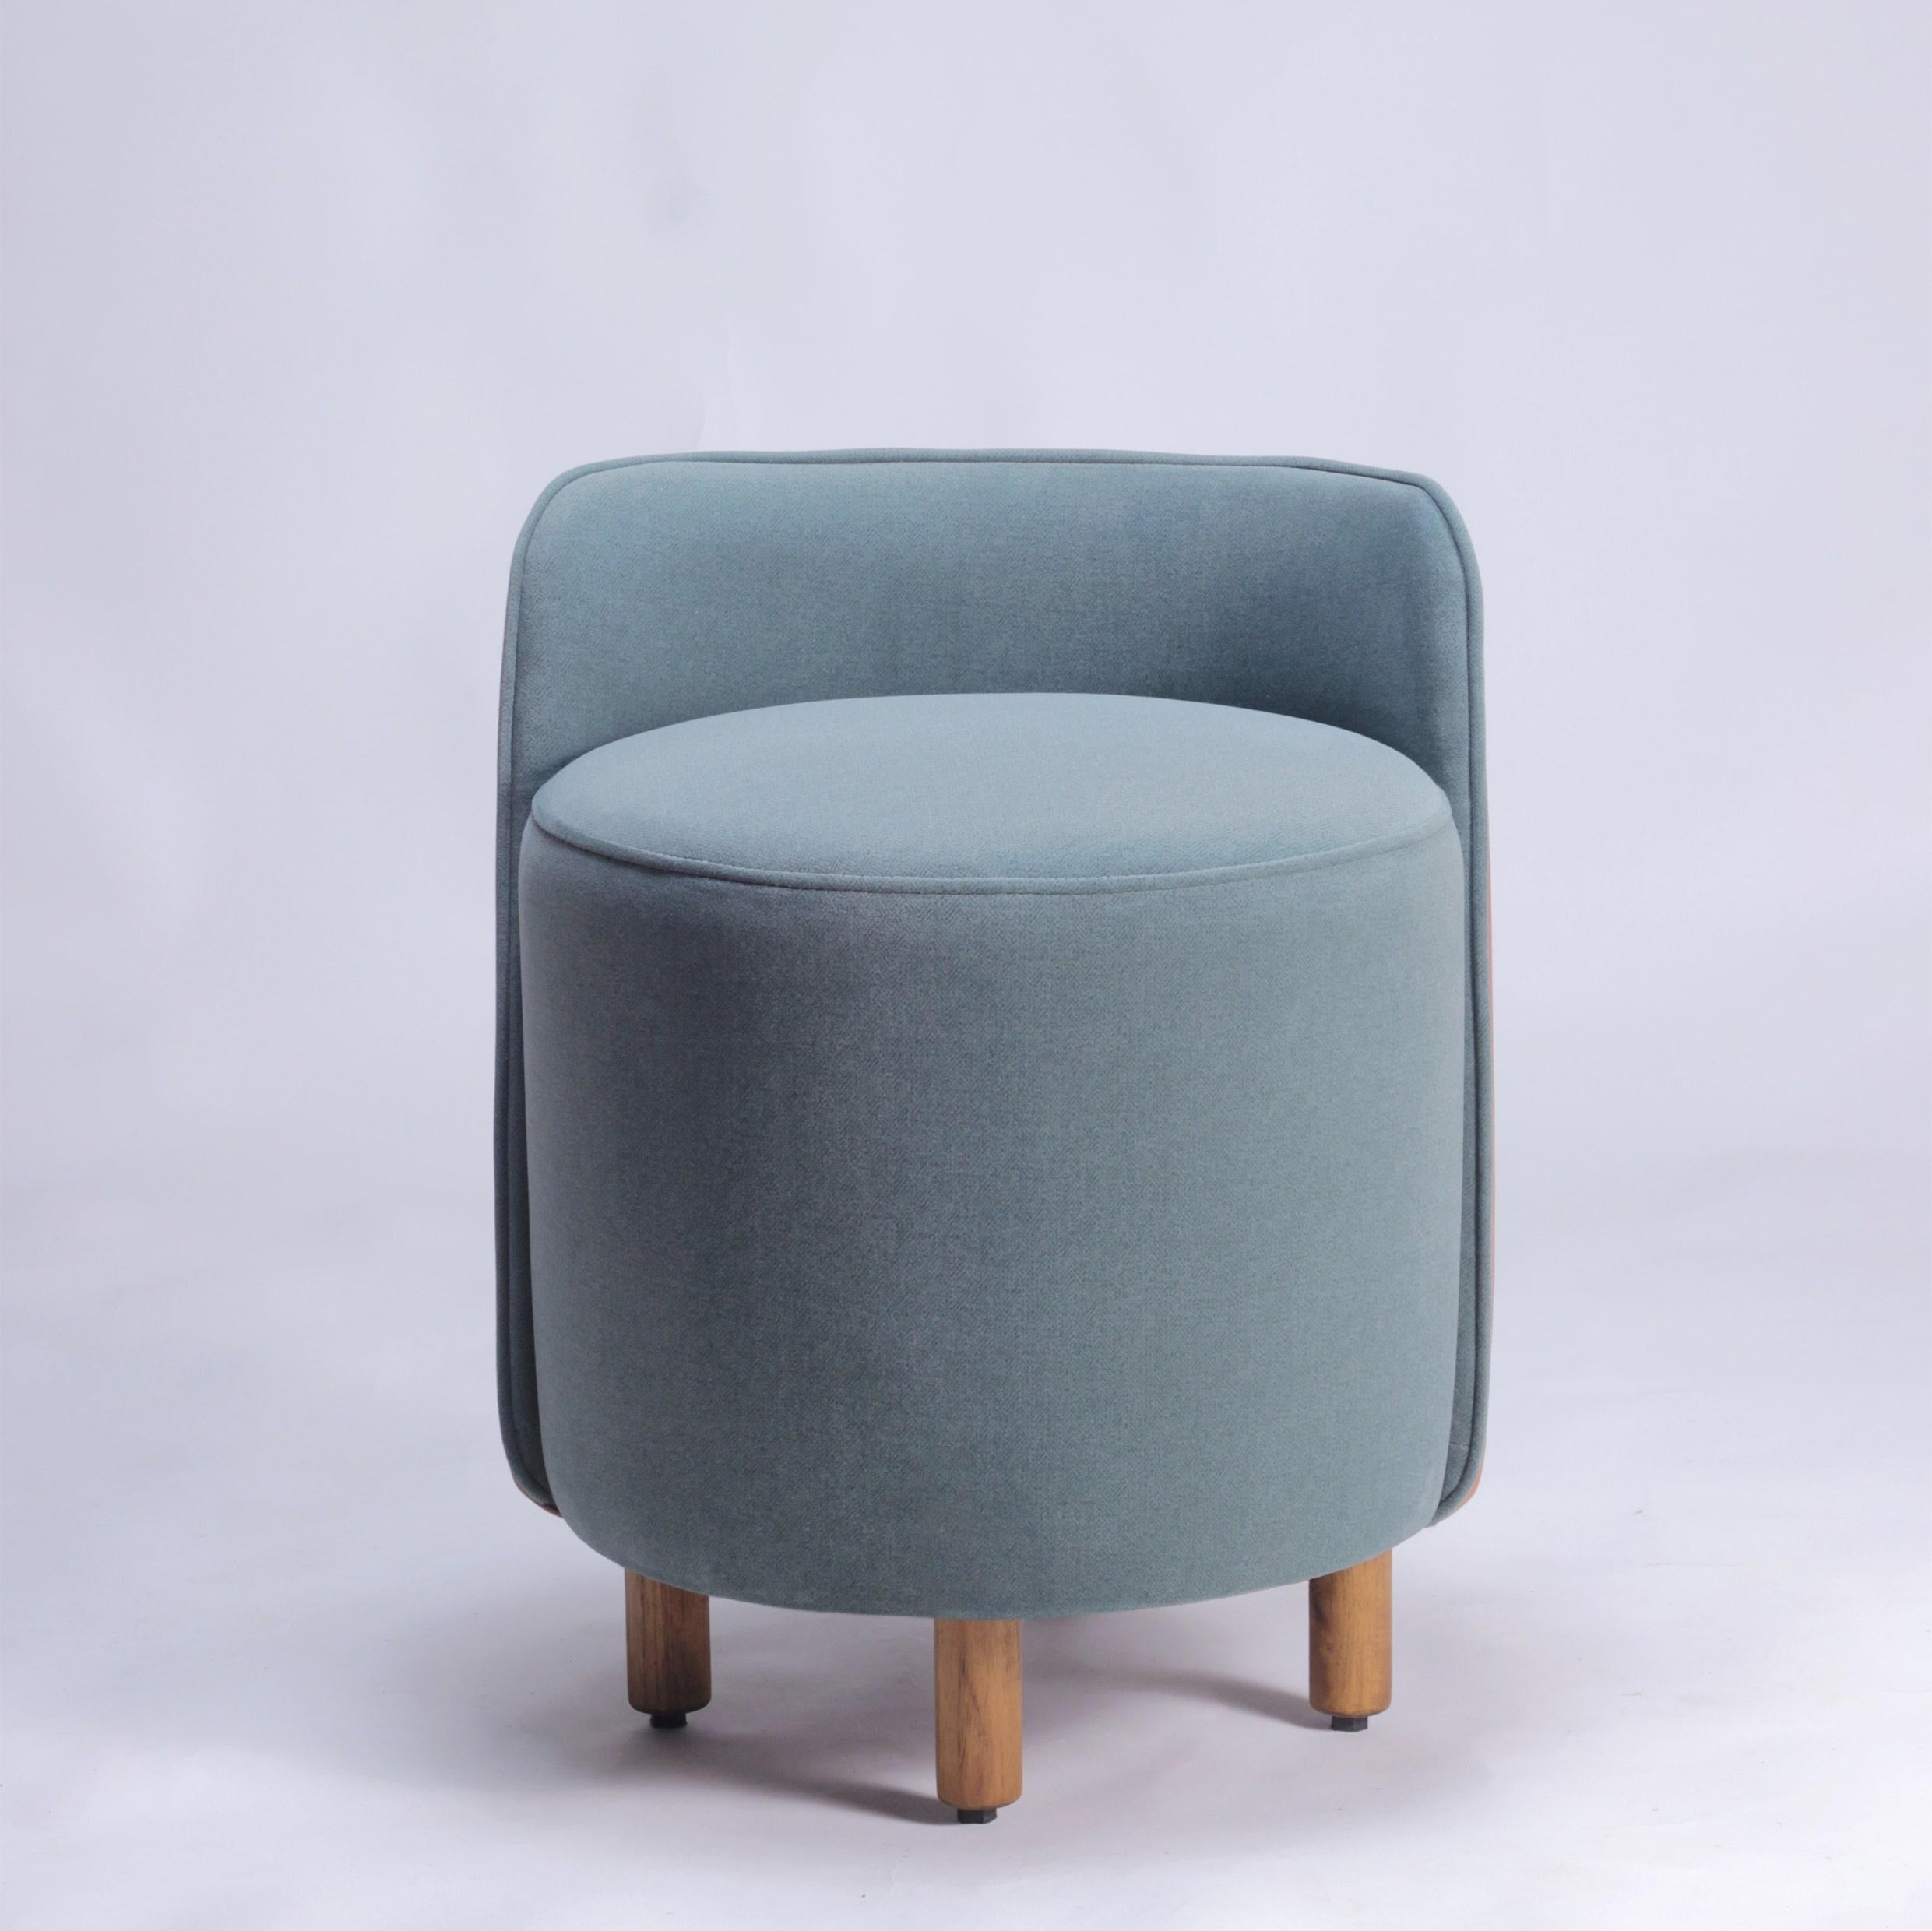 The Minpuff Pouffe is a modern and playful addition to any space. Crafted with solid wood legs, cushioned seat and a backrest, the Minpuff provides a perfect perch for a quick seat or as a footstool. The luscious upholstery creates an interesting